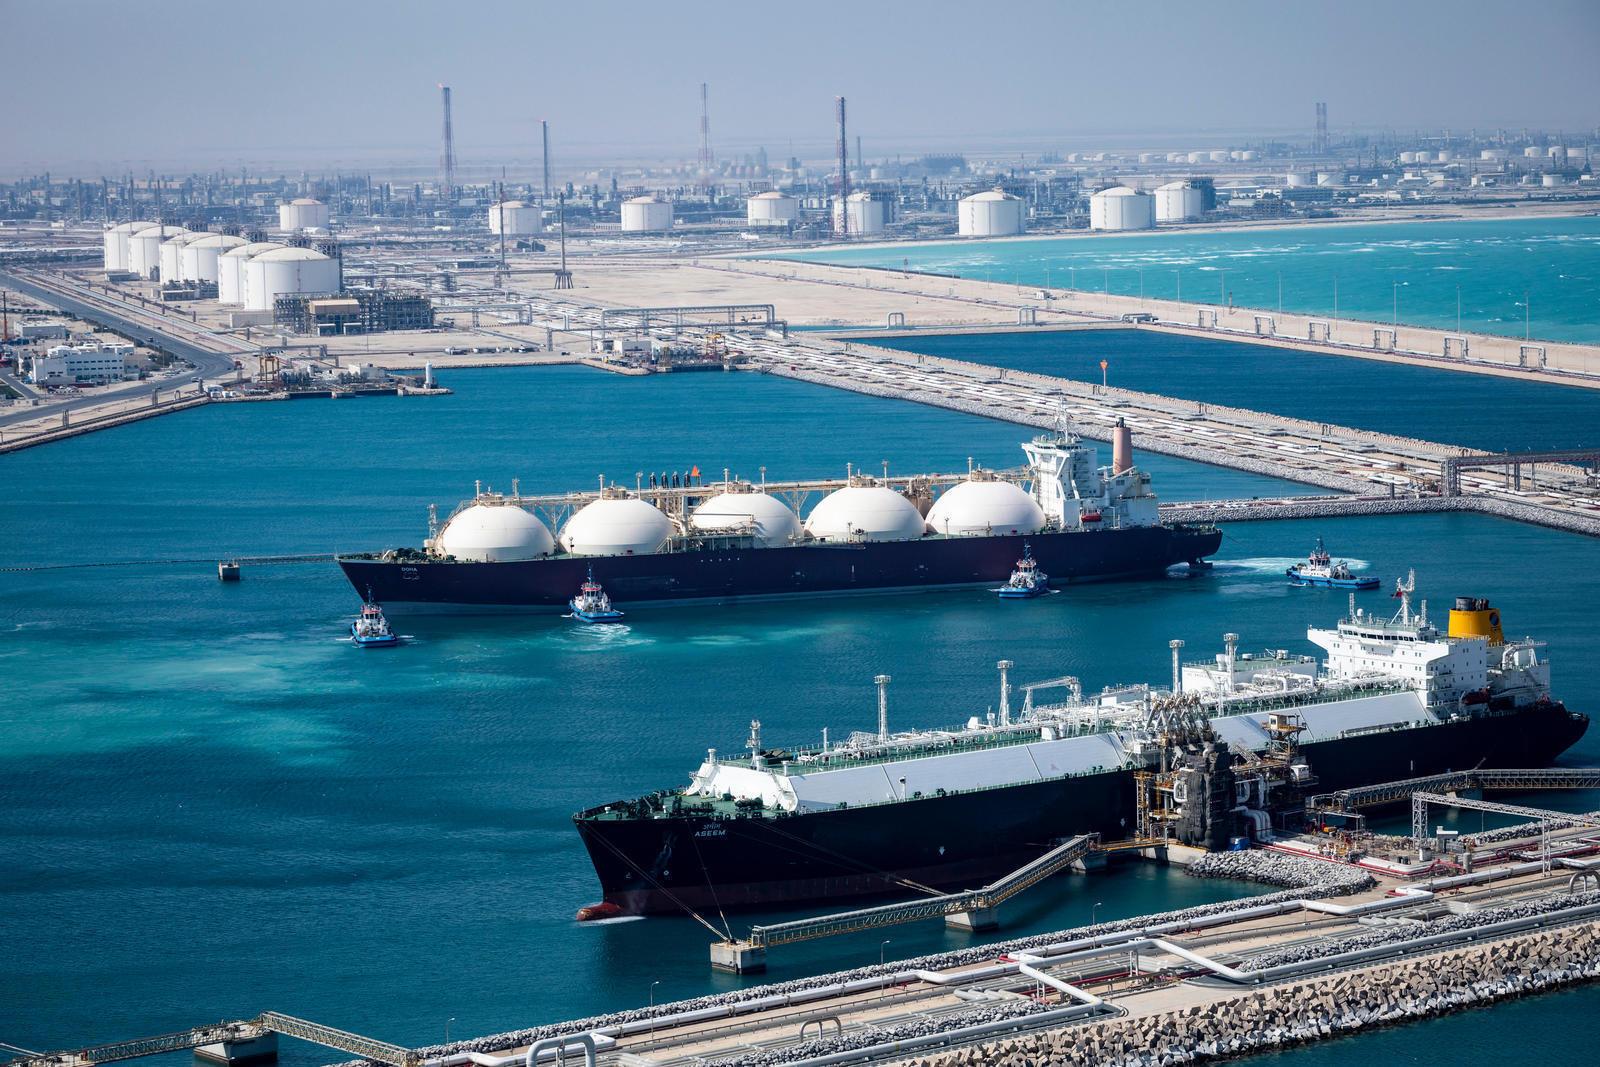 Qatar: TotalEnergies the First Company Selected to Partner with QatarEnergy  on the Giant North Field East LNG Project | TotalEnergies.com